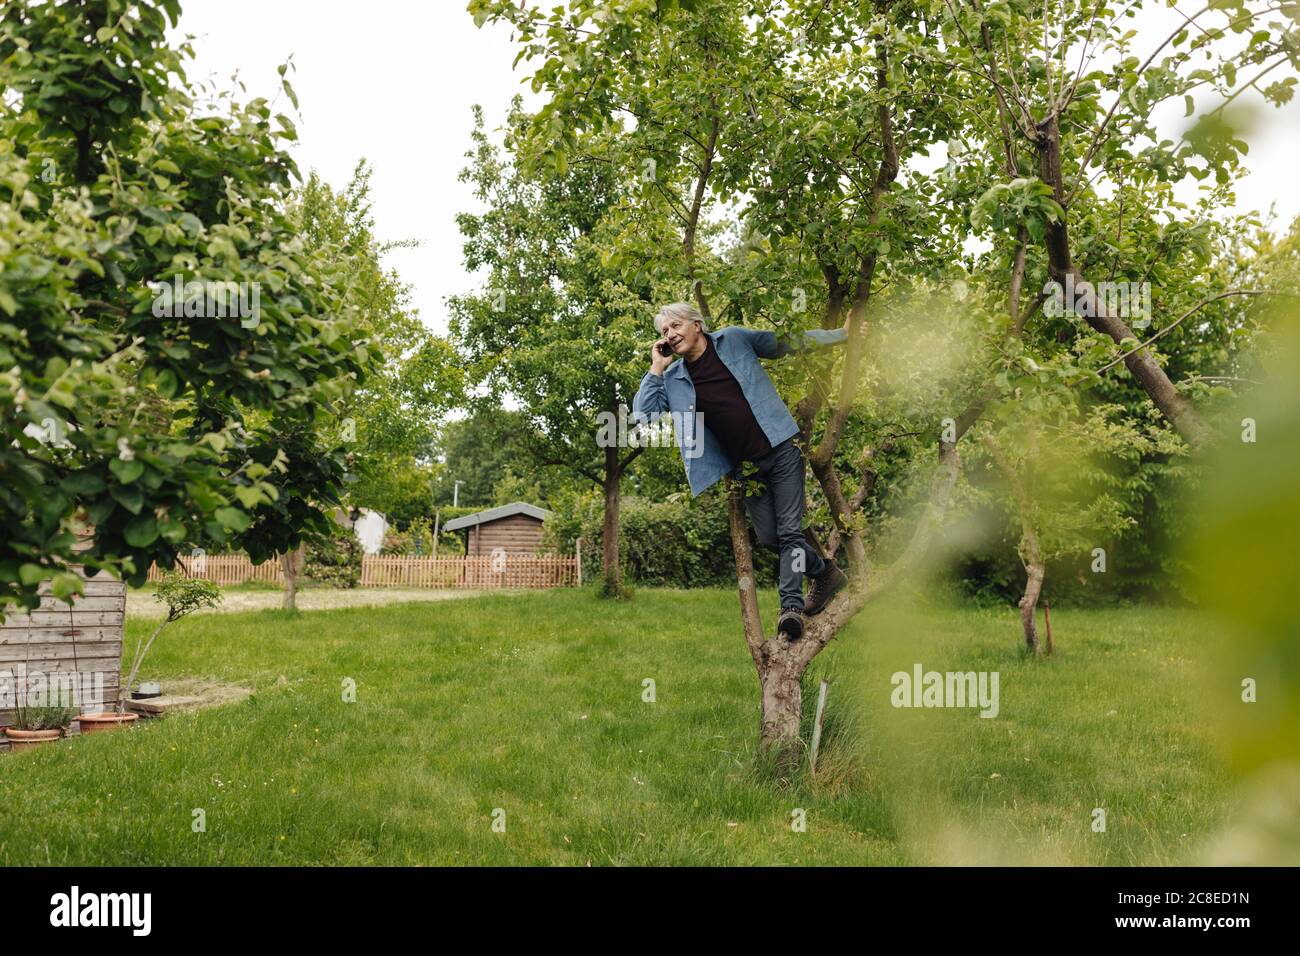 Senior man on the phone in a tree in a rural garden Stock Photo